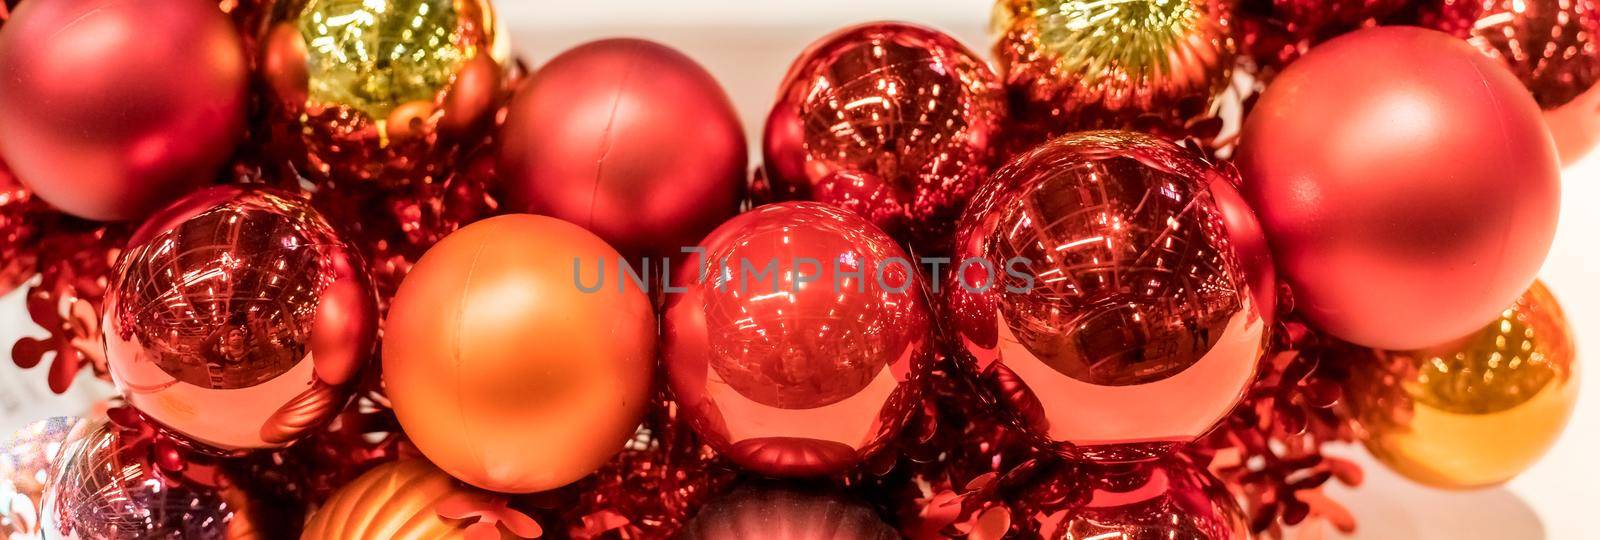 Christmas wreath with glass balls isolated on white background.Holiday round frame, gold glass Christmas balls, golden toys.Advent Christmas wreath.home decor.web banner by YuliaYaspe1979